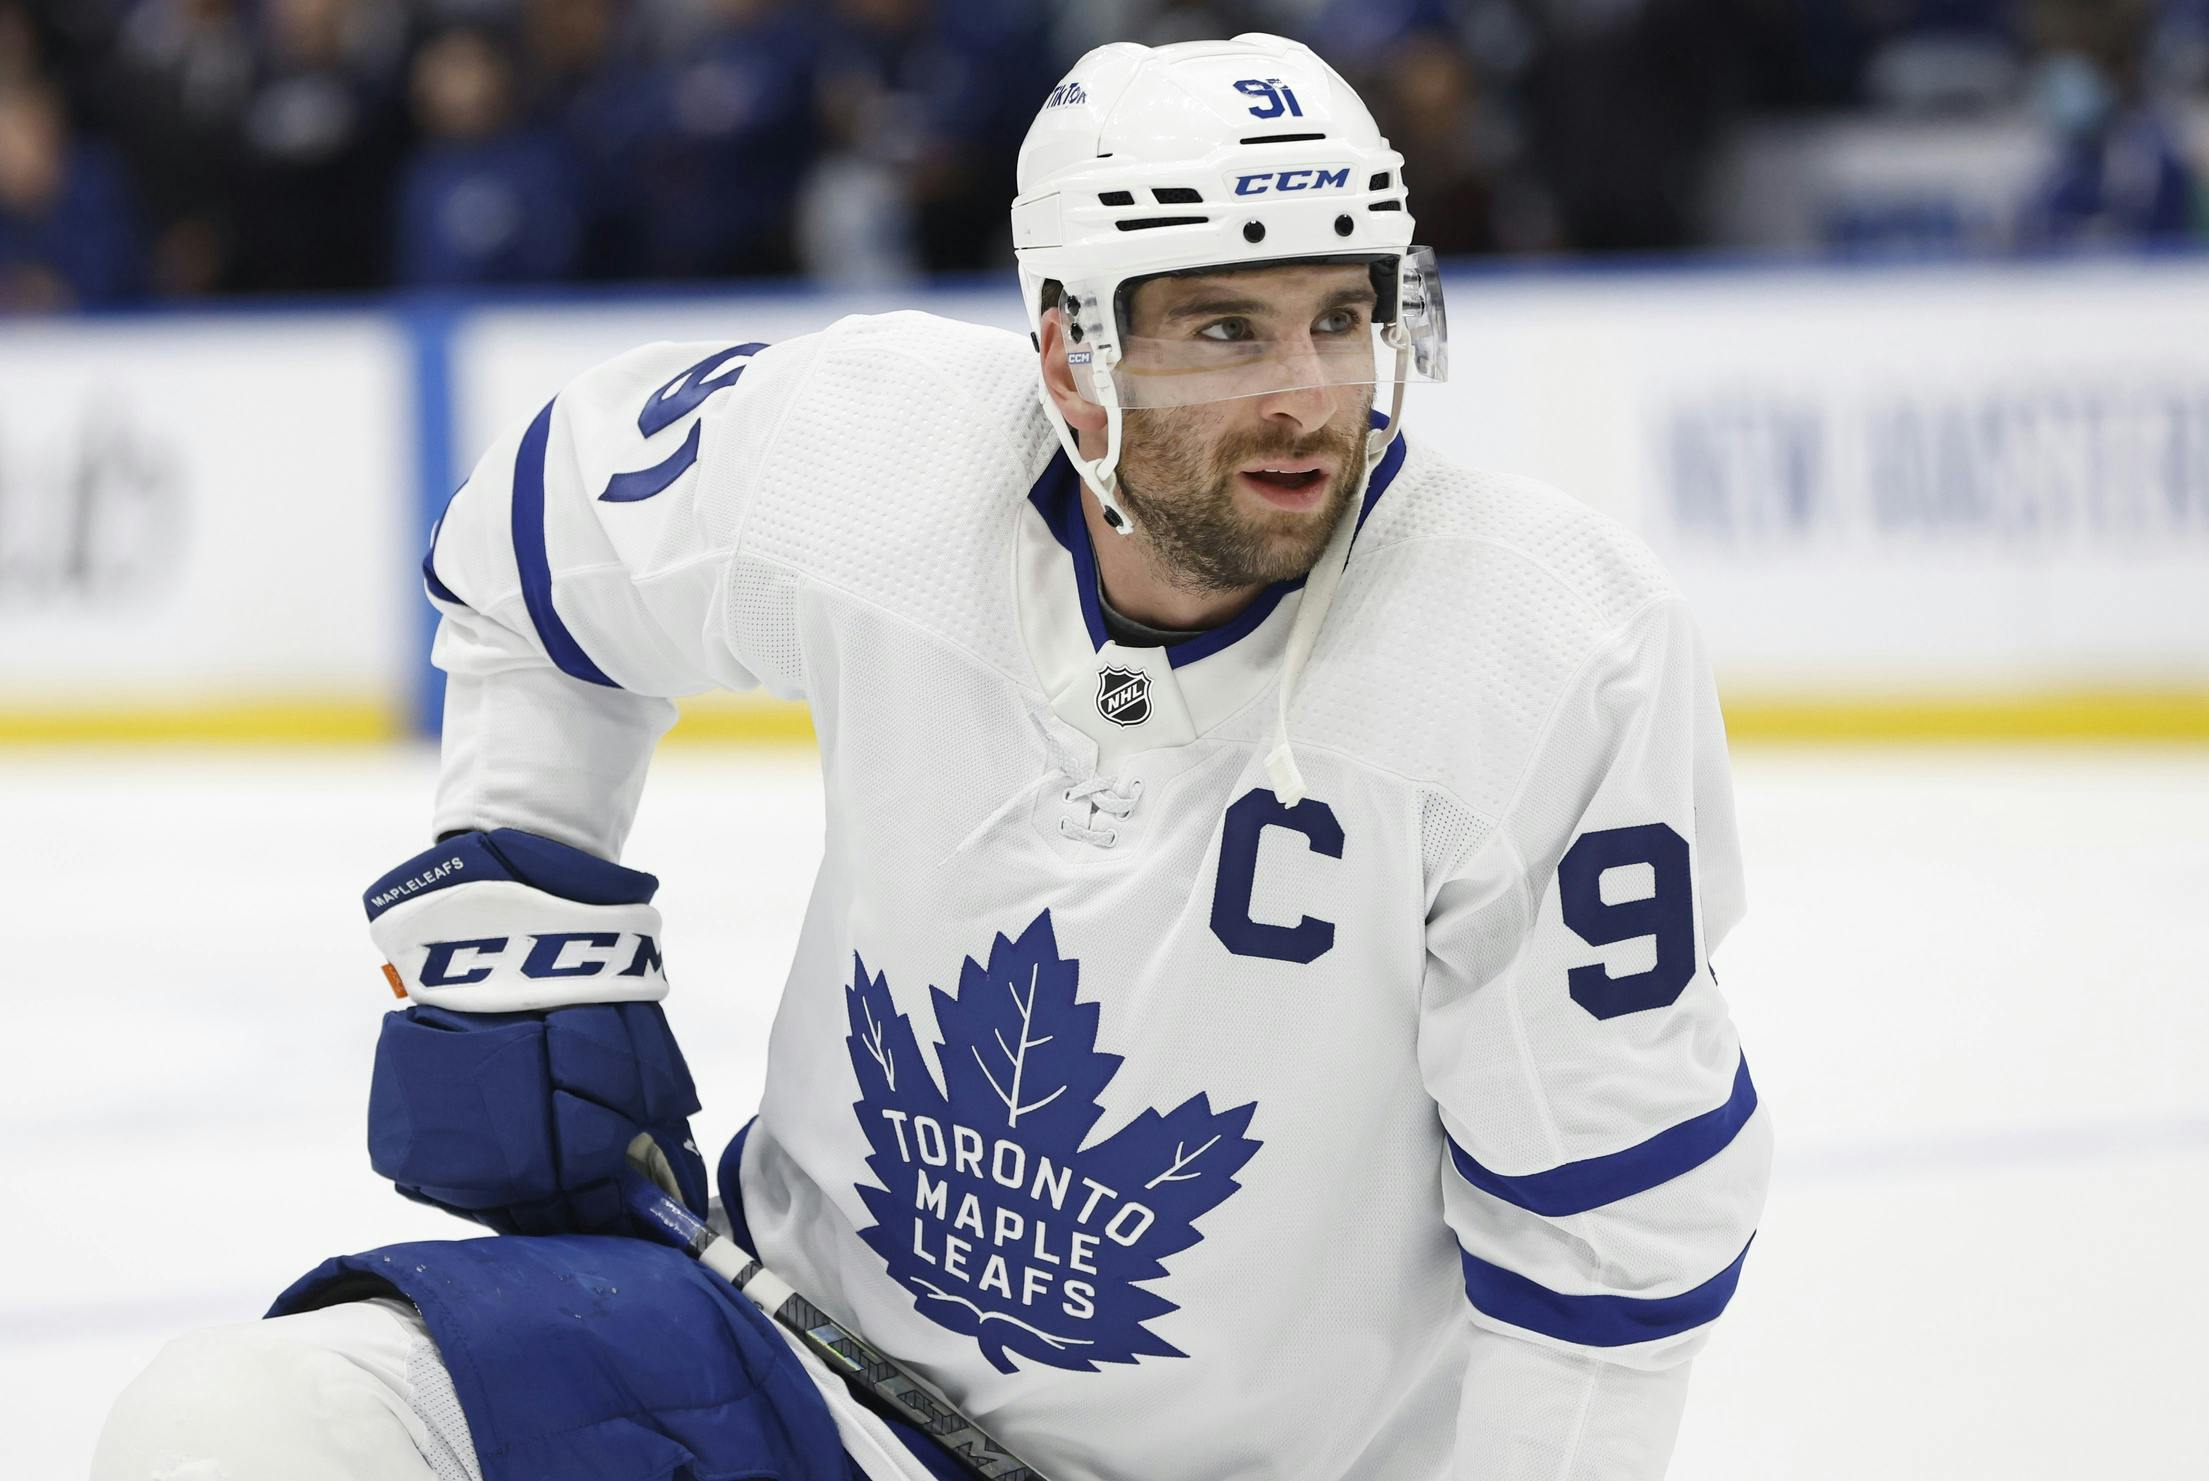 NHL playoffs: Maple Leafs need John Tavares to step up